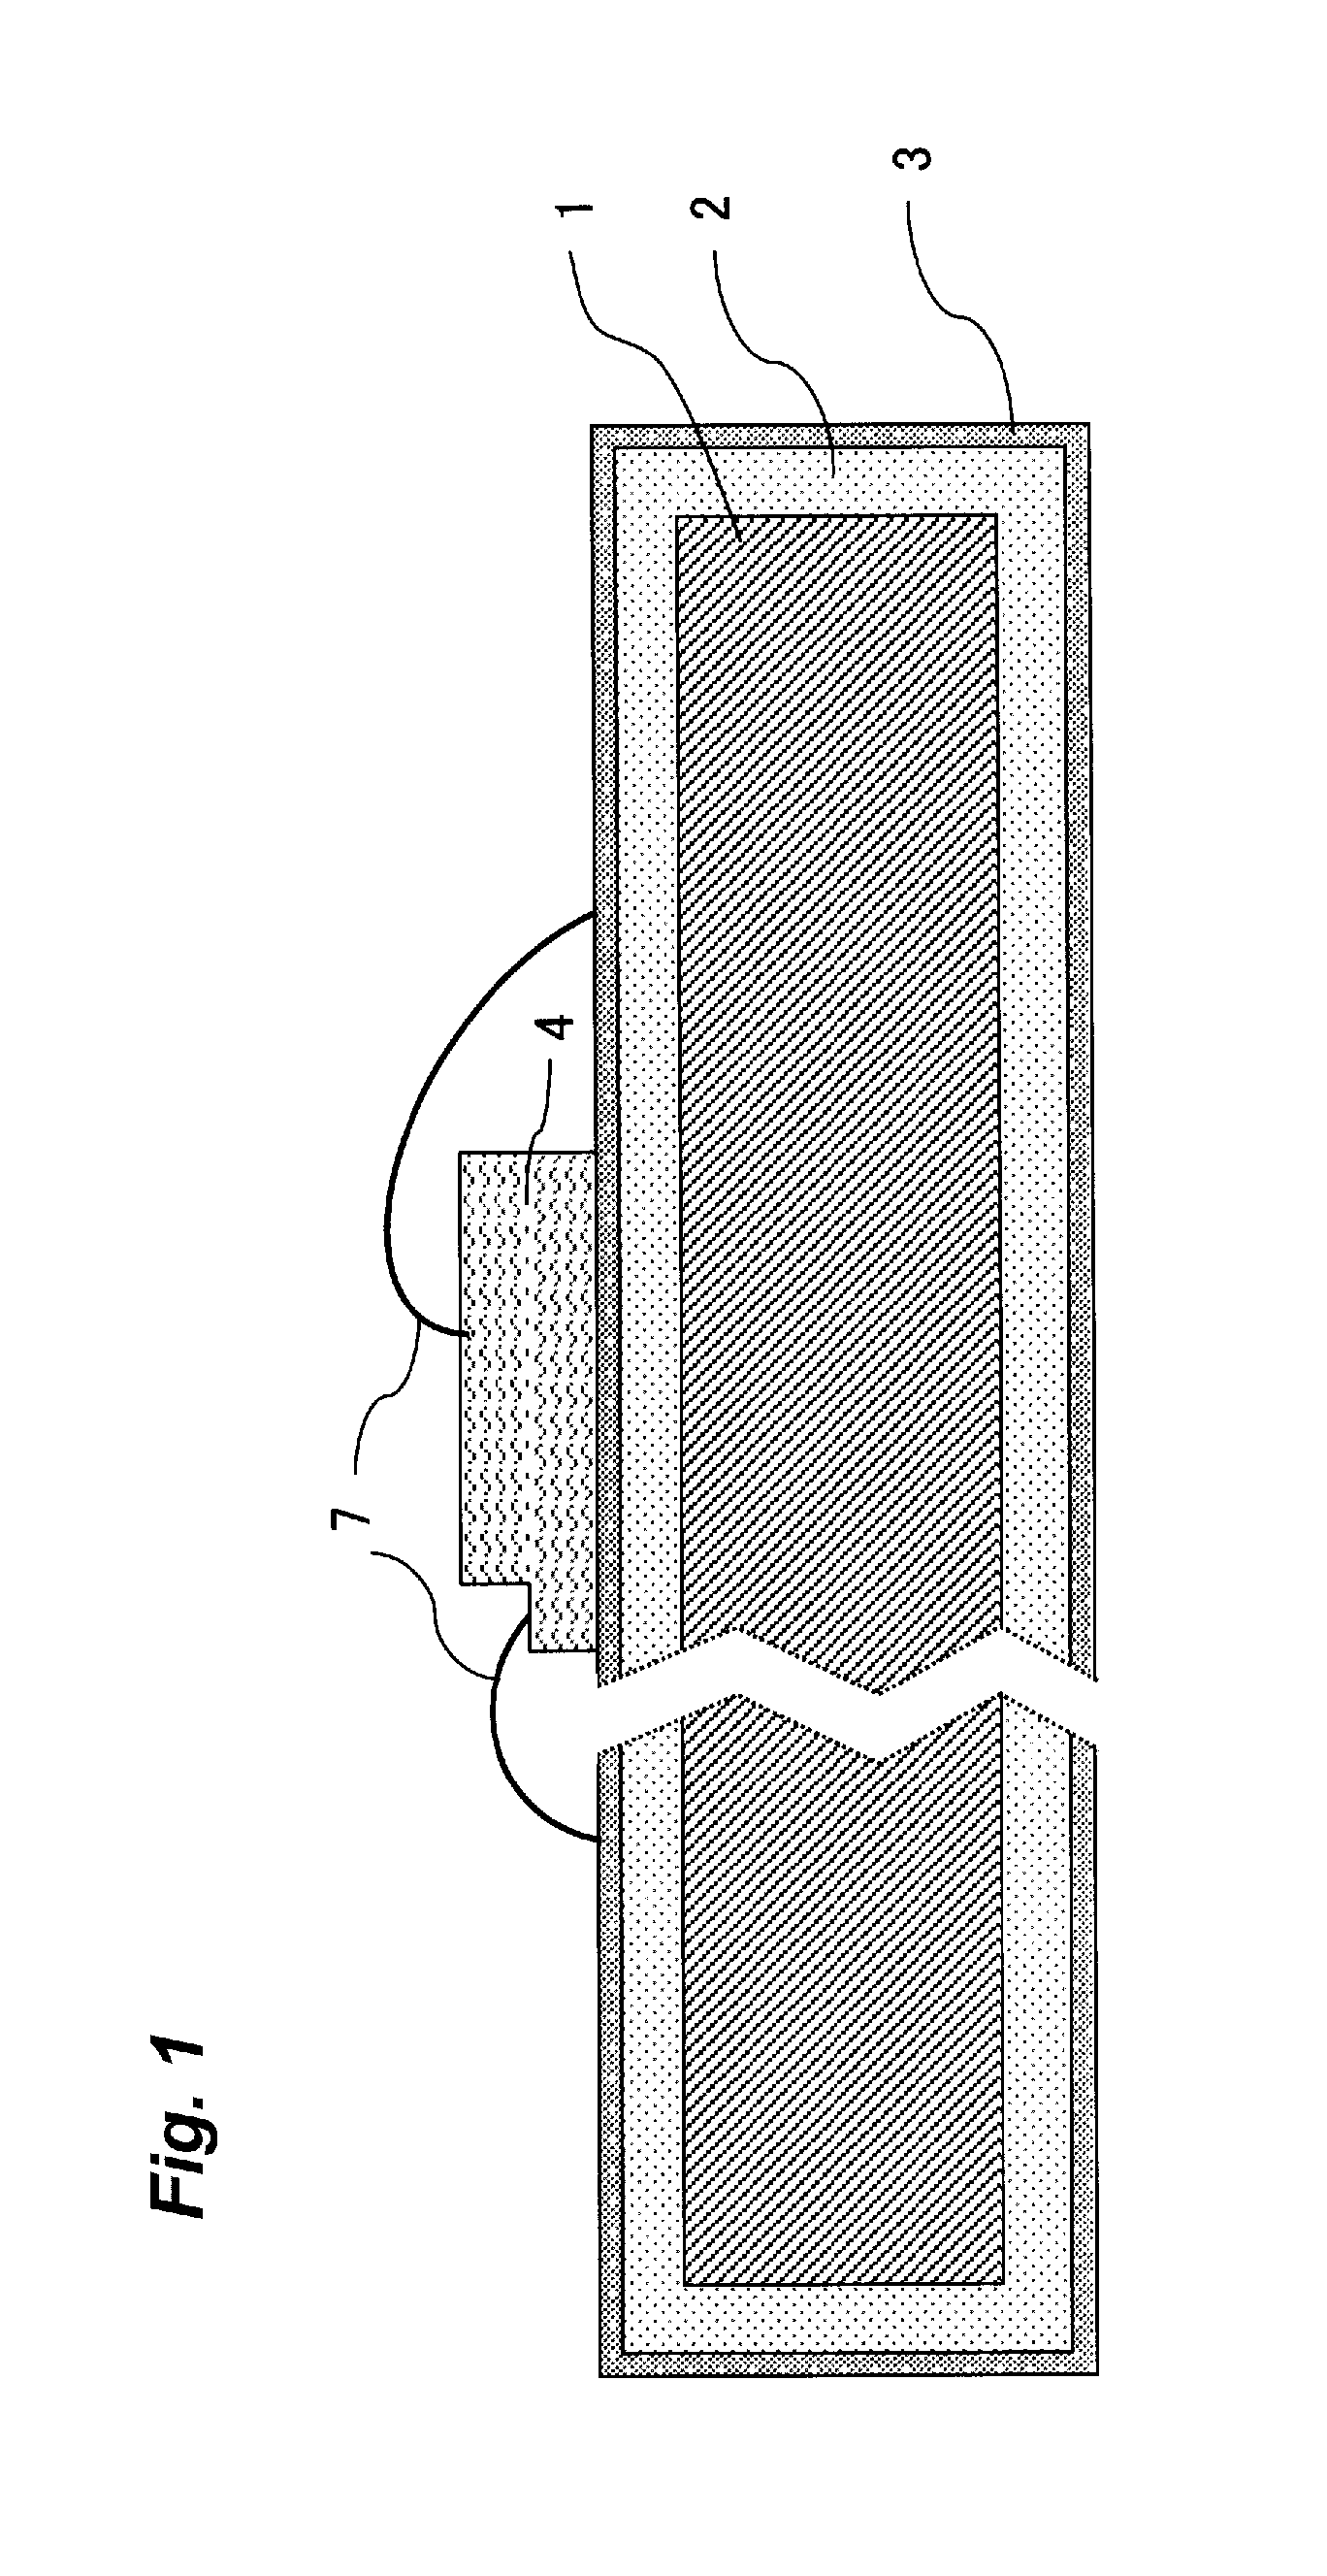 Lead frame for optical semiconductor device, method of producing the same, and optical semiconductor device